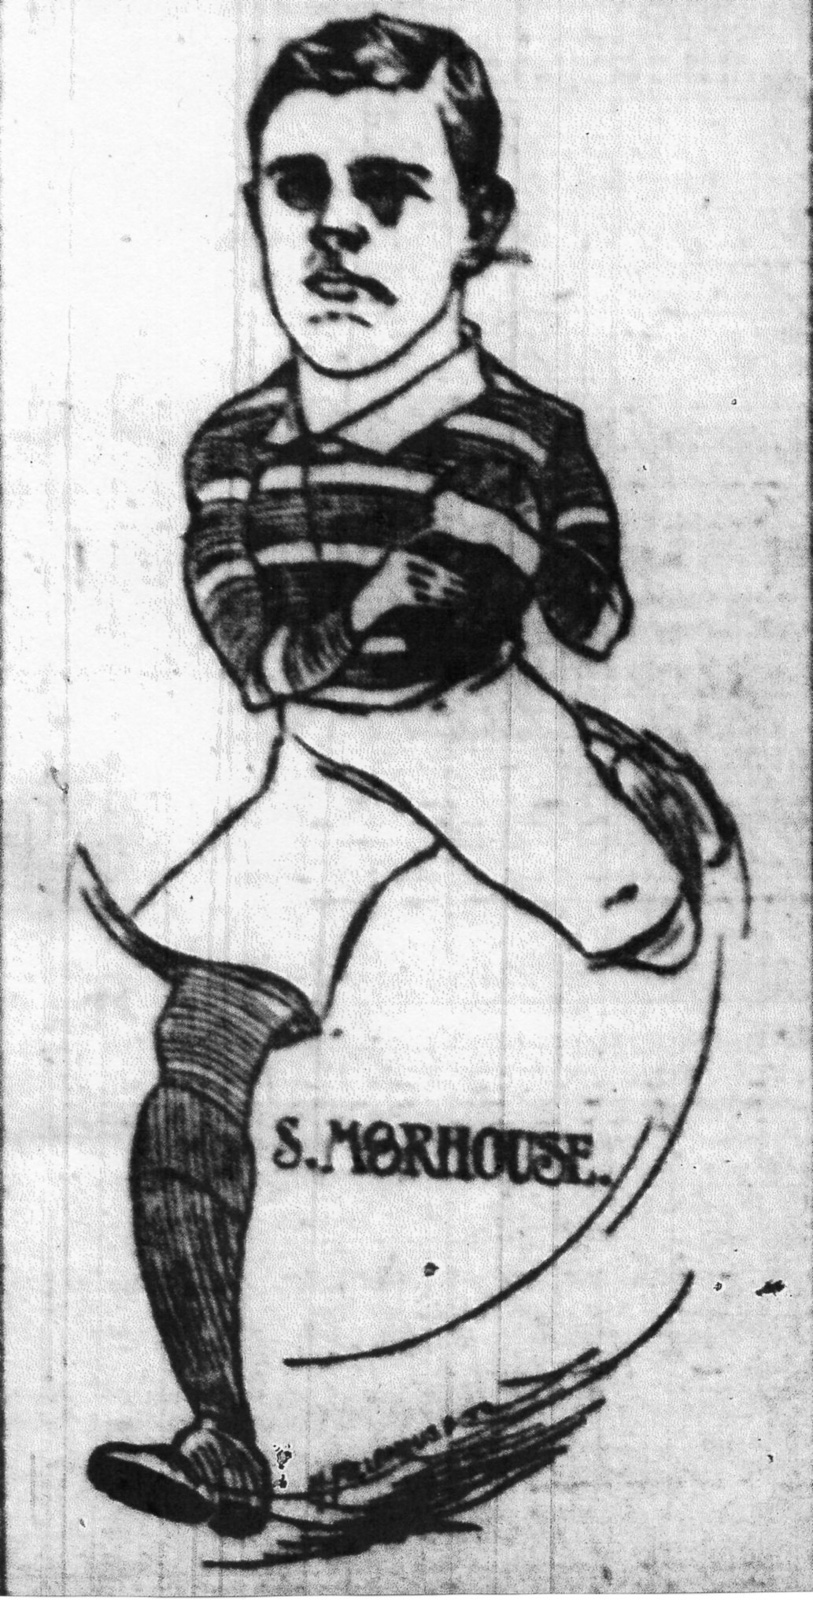 Stanley_Moorhouse_-_a_caricature_from_1910.jpg